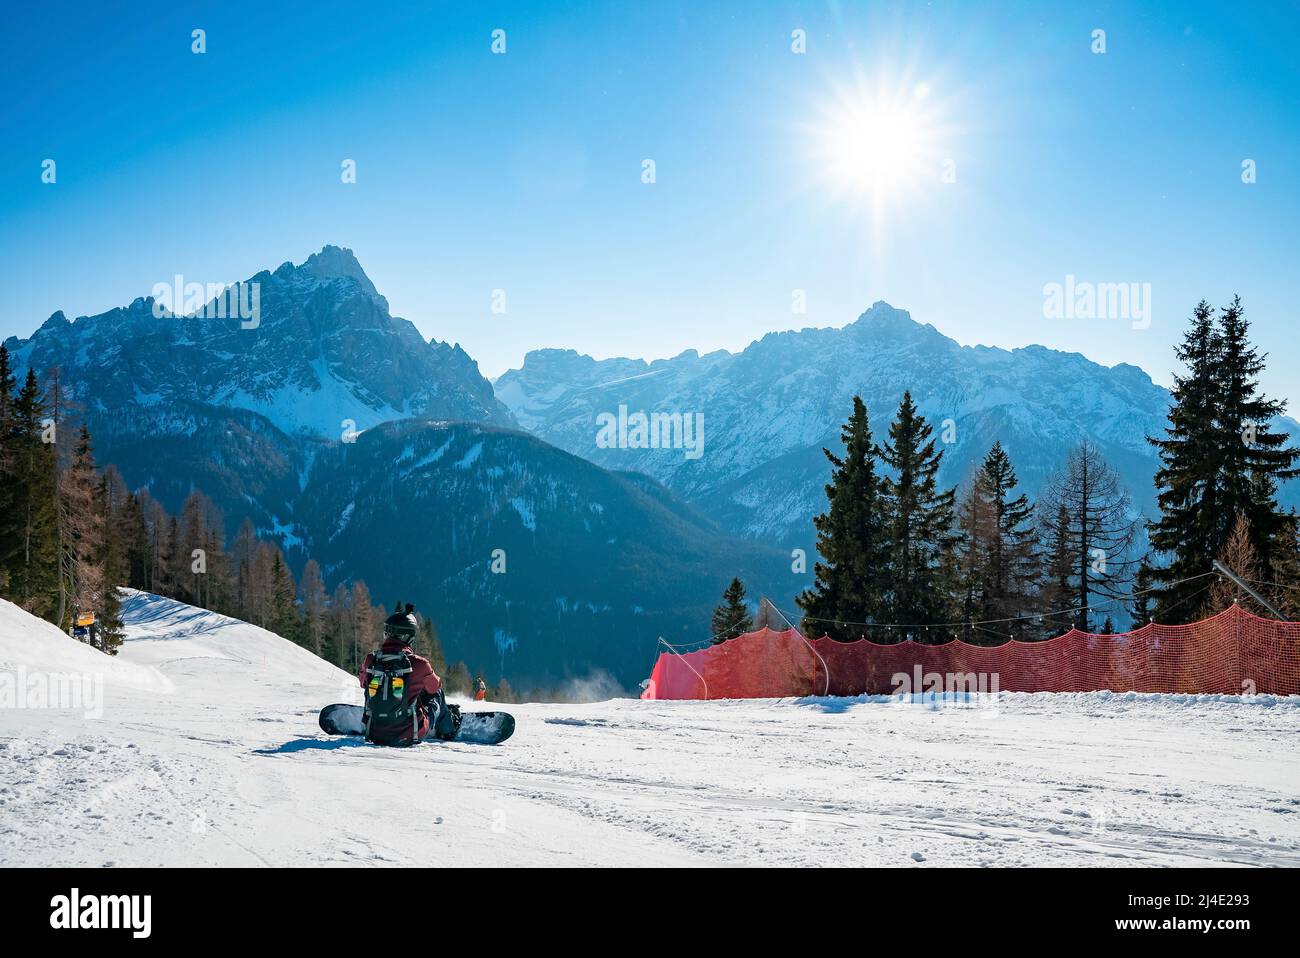 Sun shining on tired snowboarder sitting on snowy landscape against mountains Stock Photo